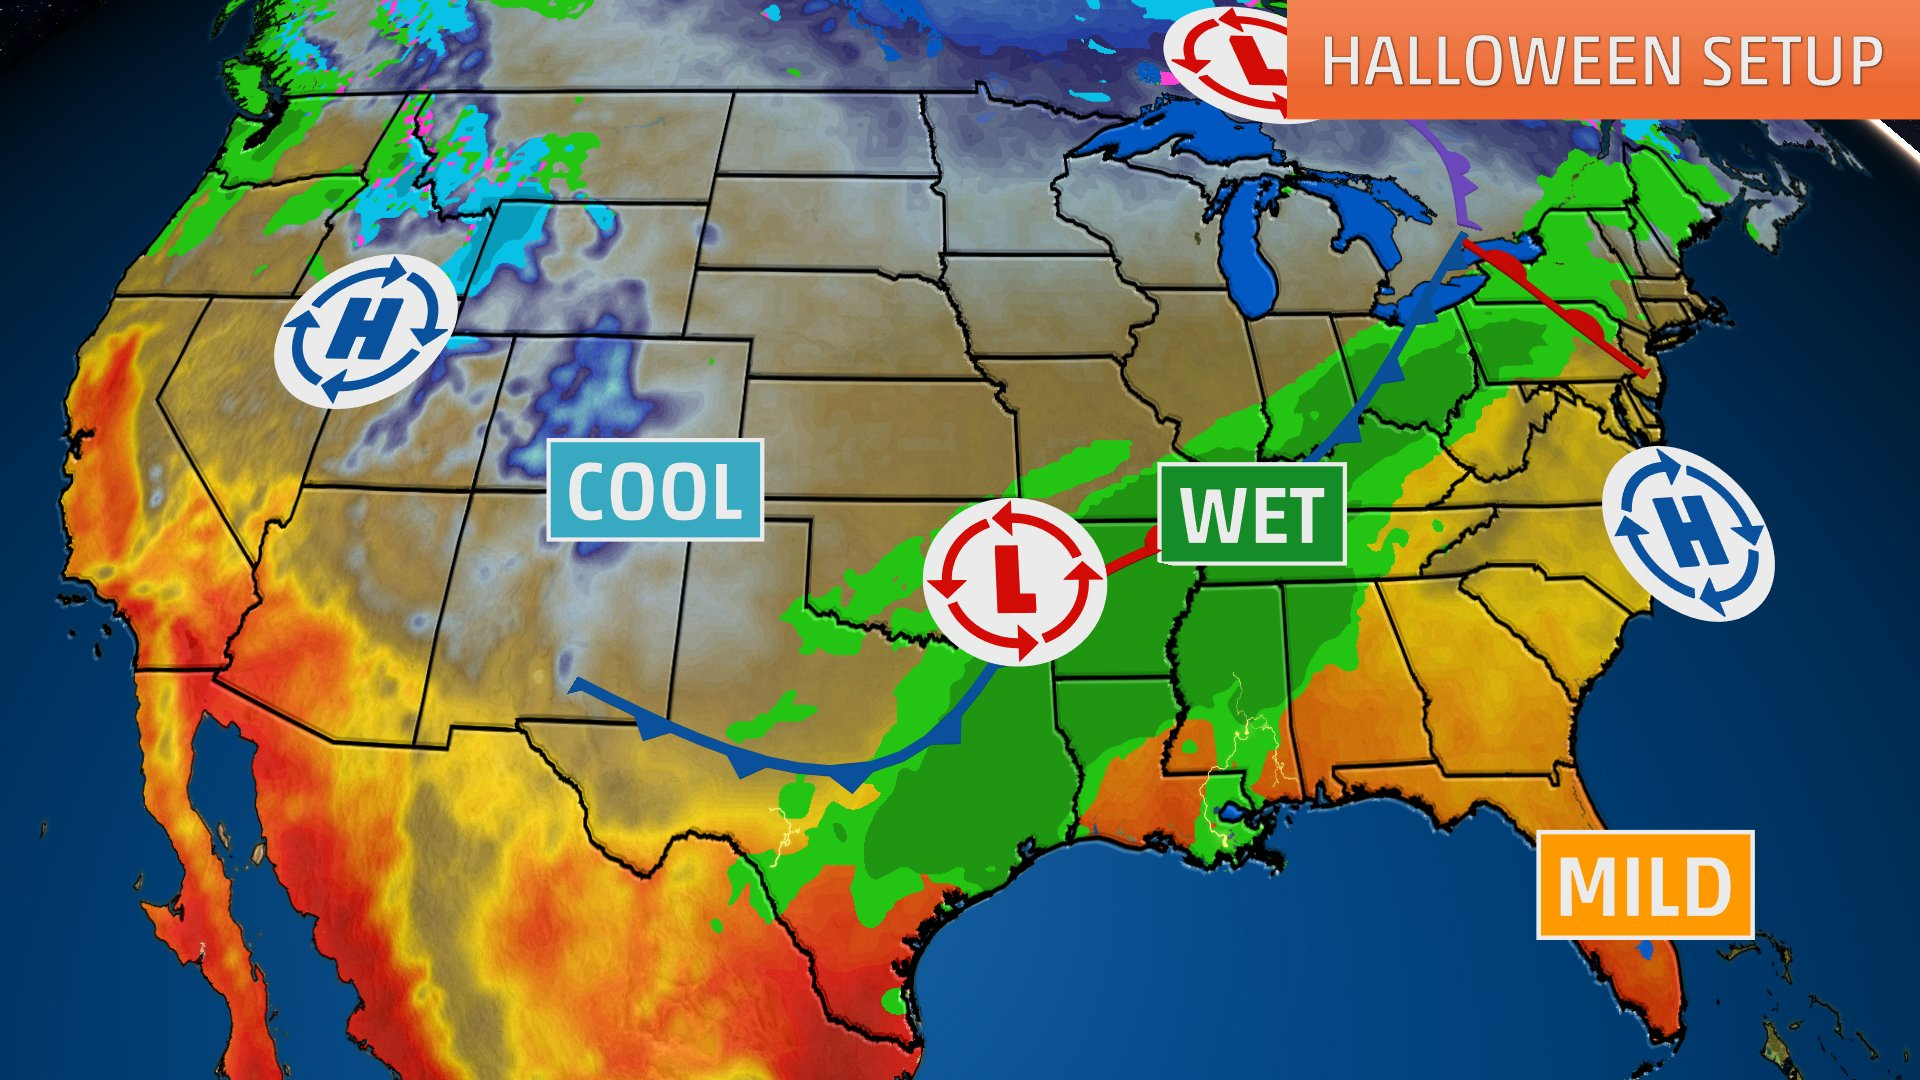 Halloween Weather Forecast: Wet Conditions From Texas To Ohio Valley - South Florida Radar Map